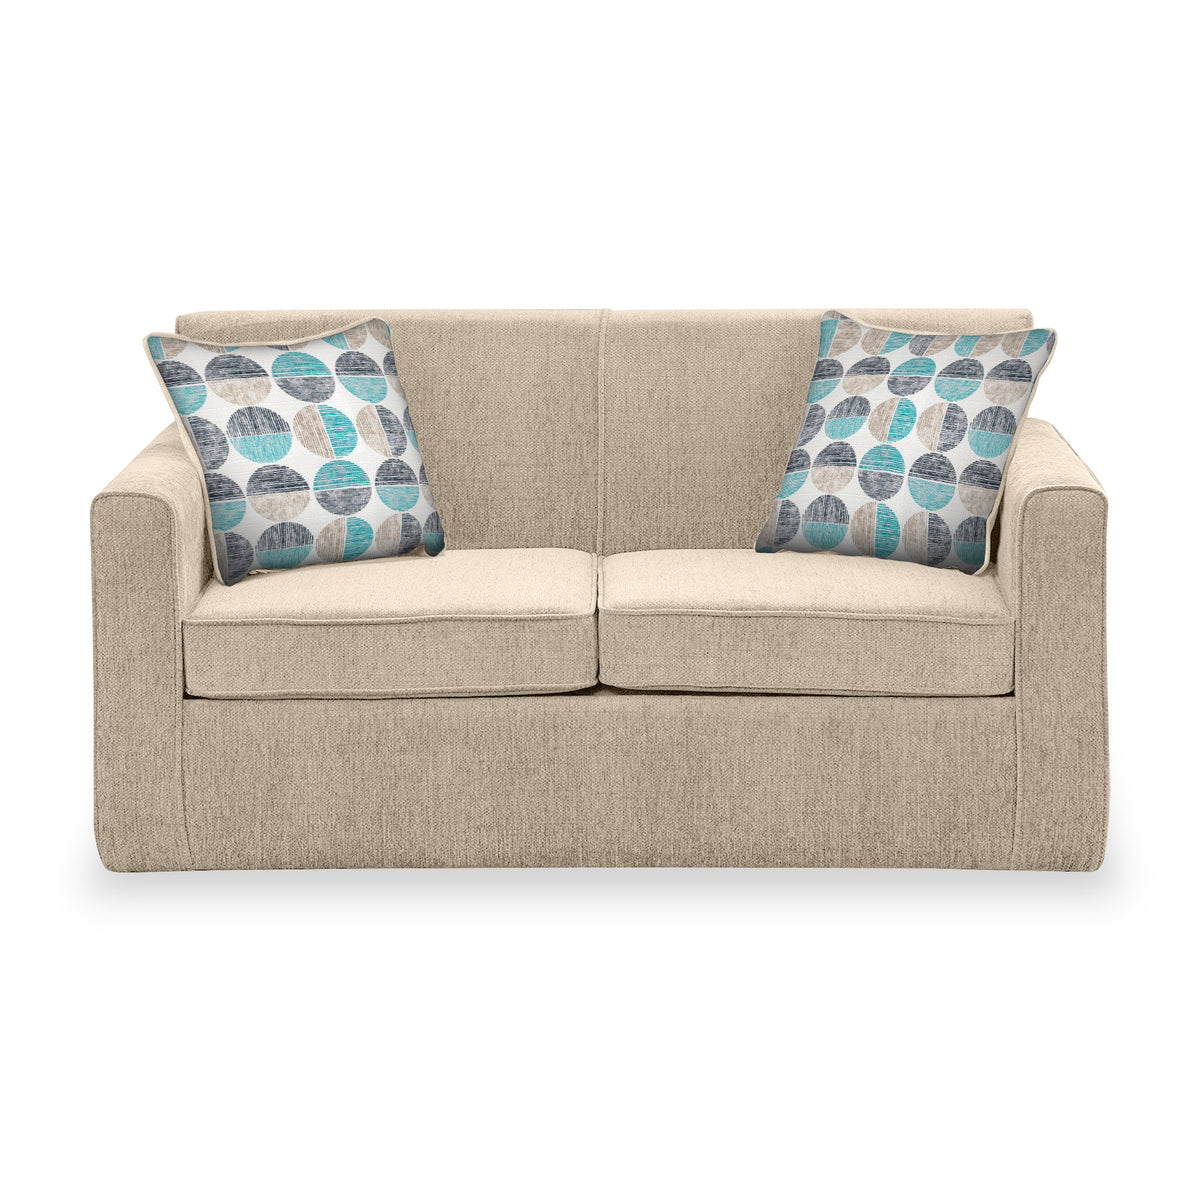 Bawtry Oatmeal Faux Linen 2 Seater Sofabed with Duck Egg Scatter Cushions from Roseland Furniture